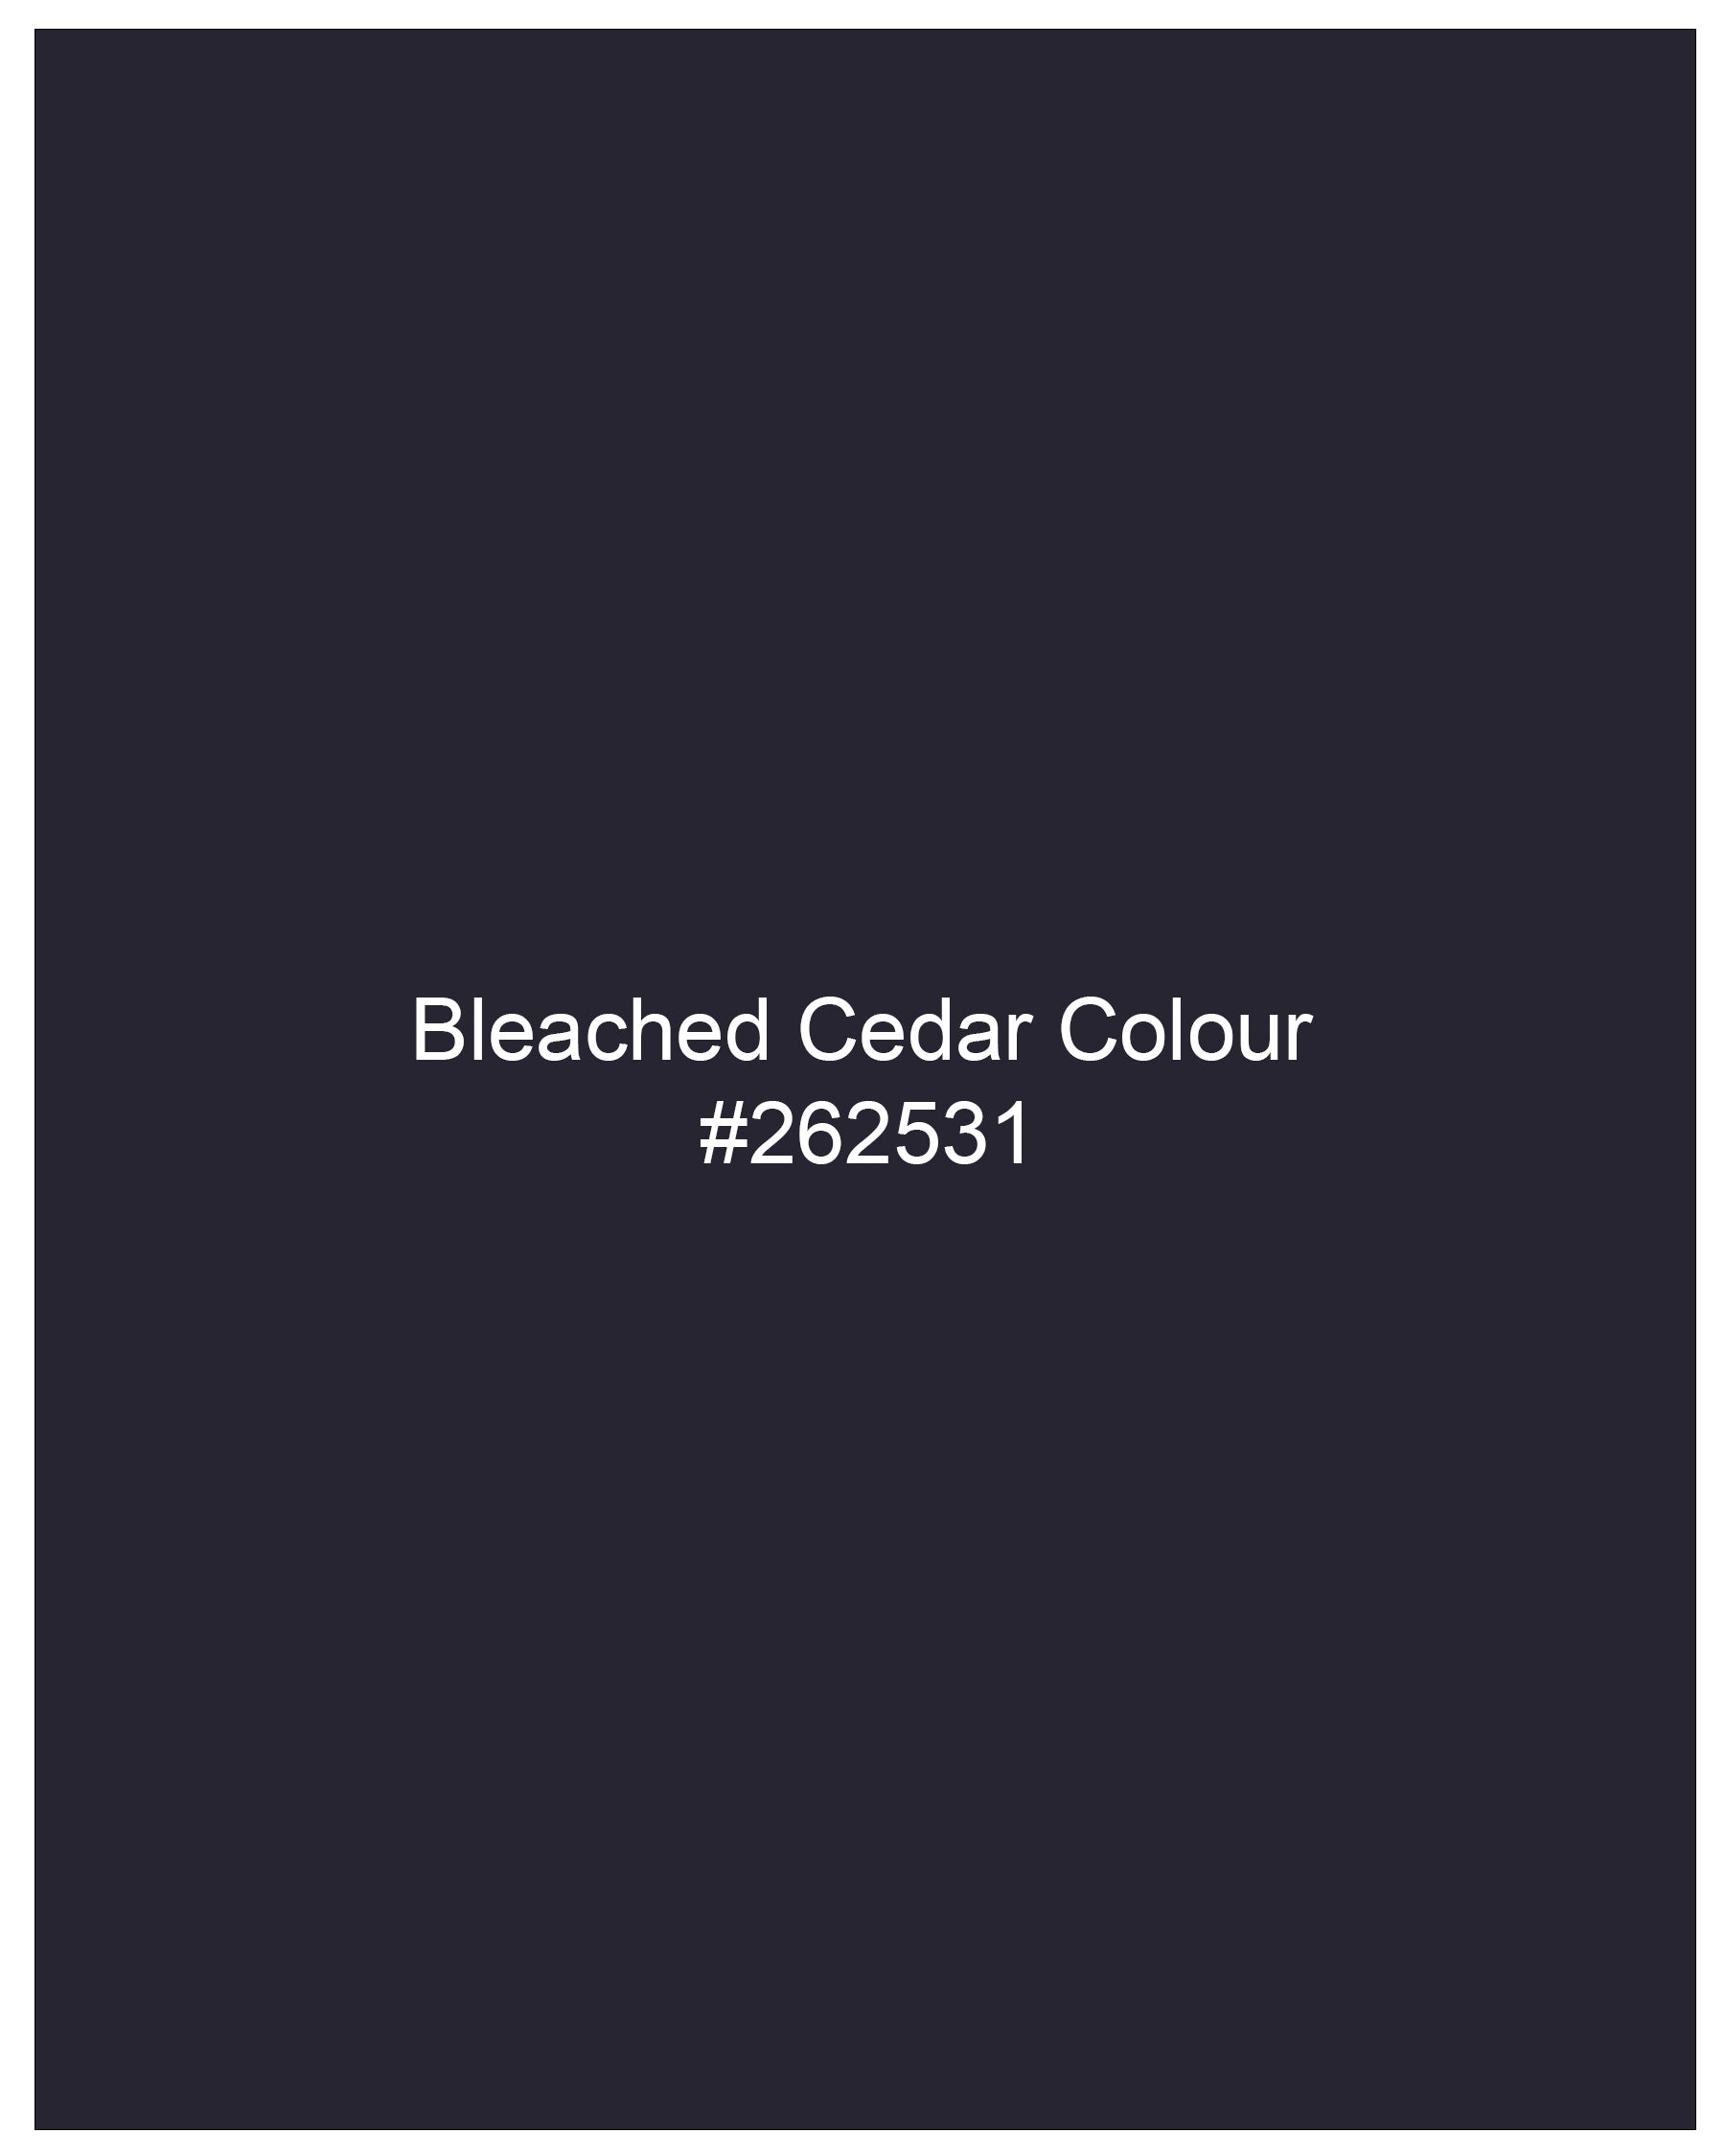 Bleached Cedar Navy Blue Ditzy Textured With Black Waistcoat  V2104-36, V2104-38, V2104-40, V2104-42, V2104-44, V2104-46, V2104-48, V2104-50, V2104-52, V2104-54, V2104-56, V2104-58, V2104-60